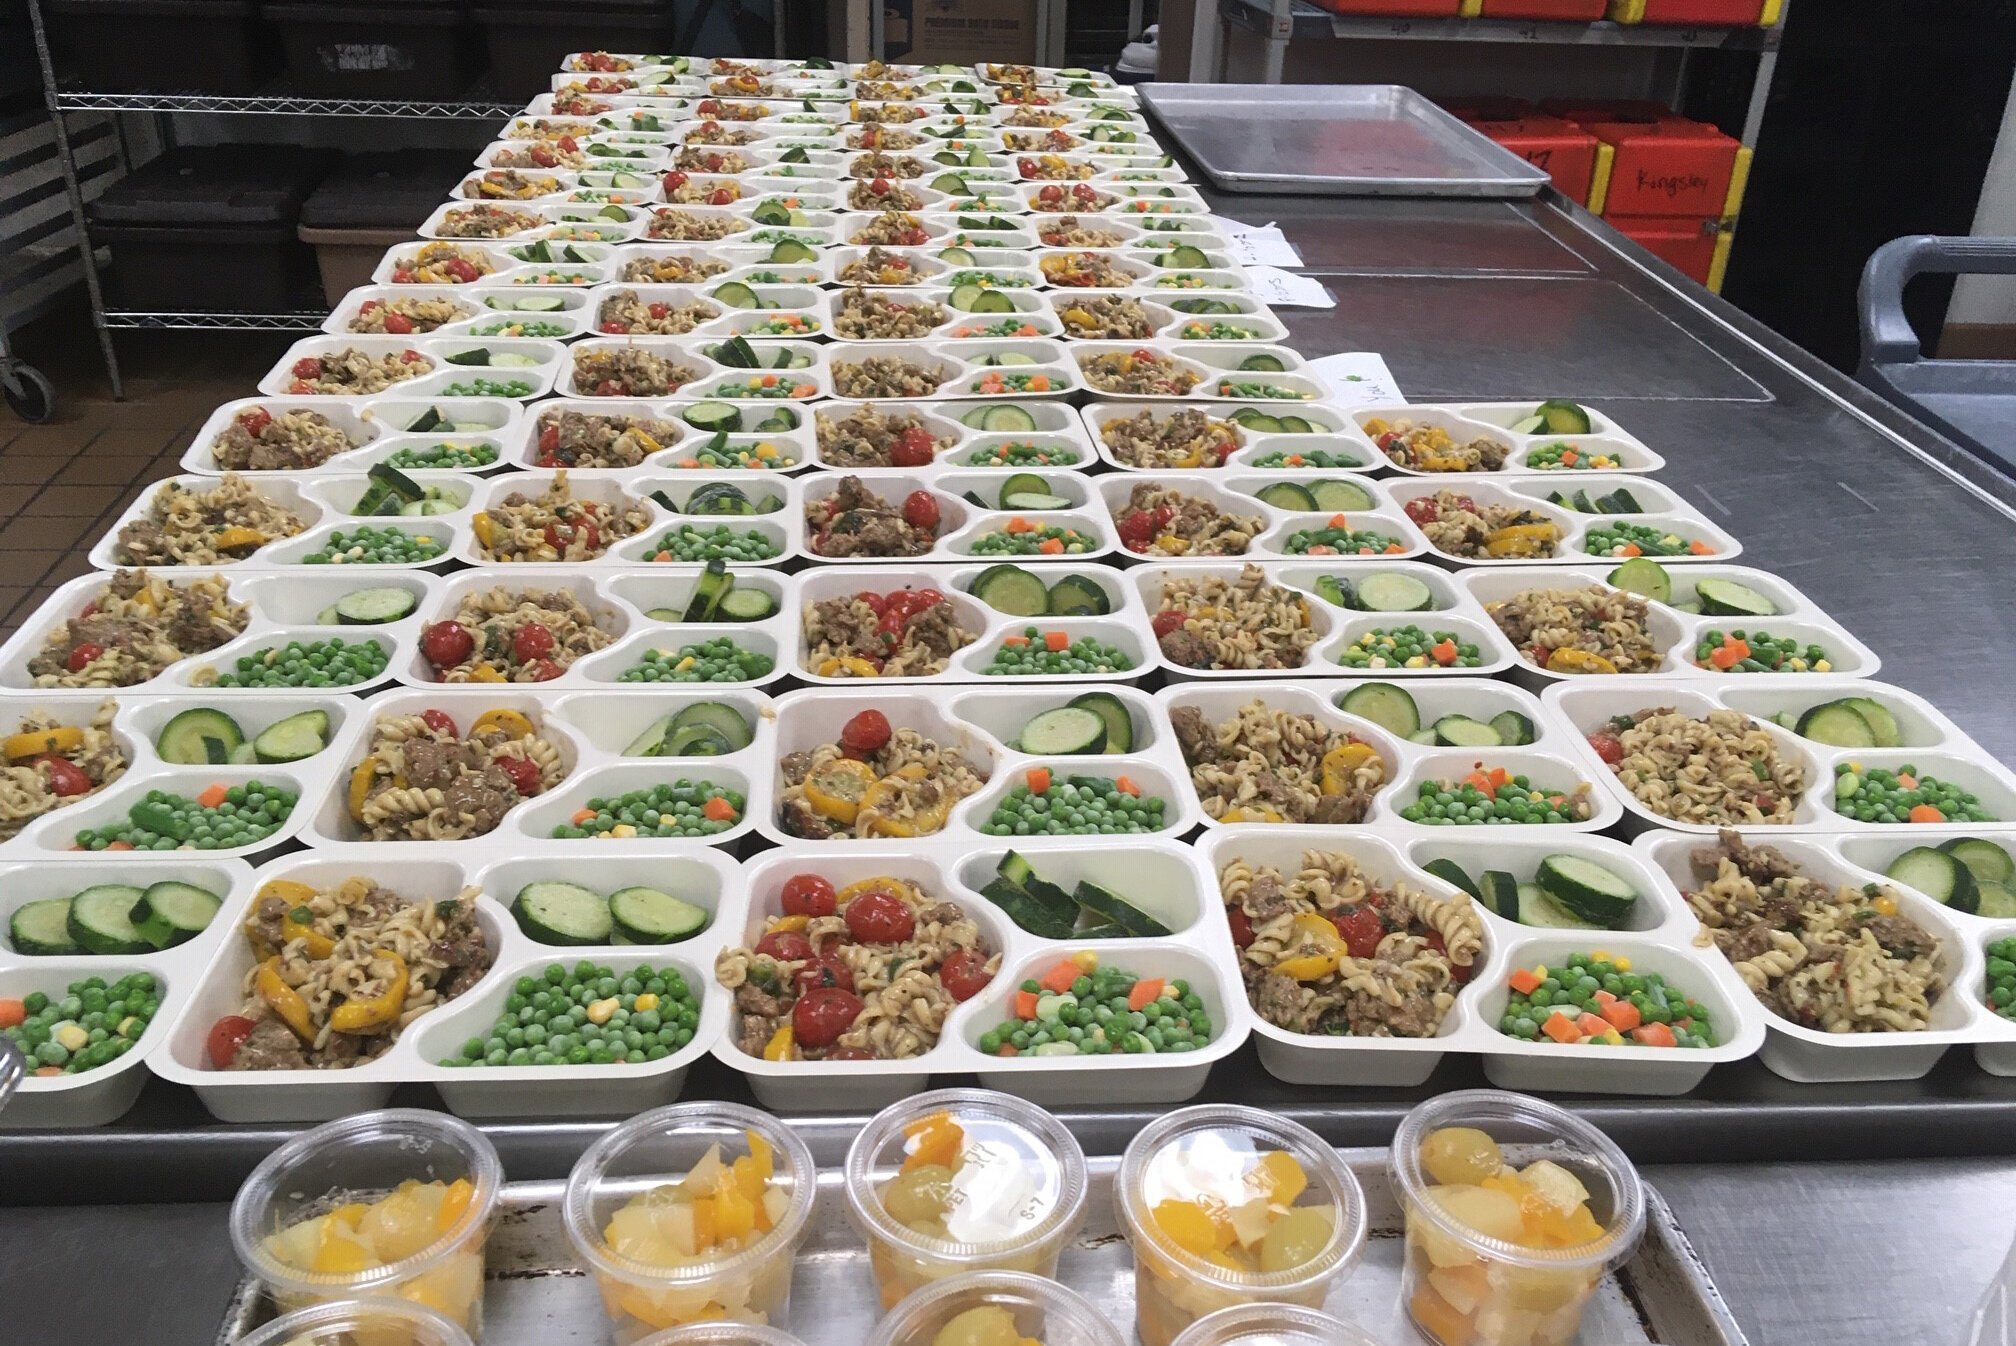 Healthy meals are prepared for the Northwest Michigan Community Action Agency's Meals on Wheels program.